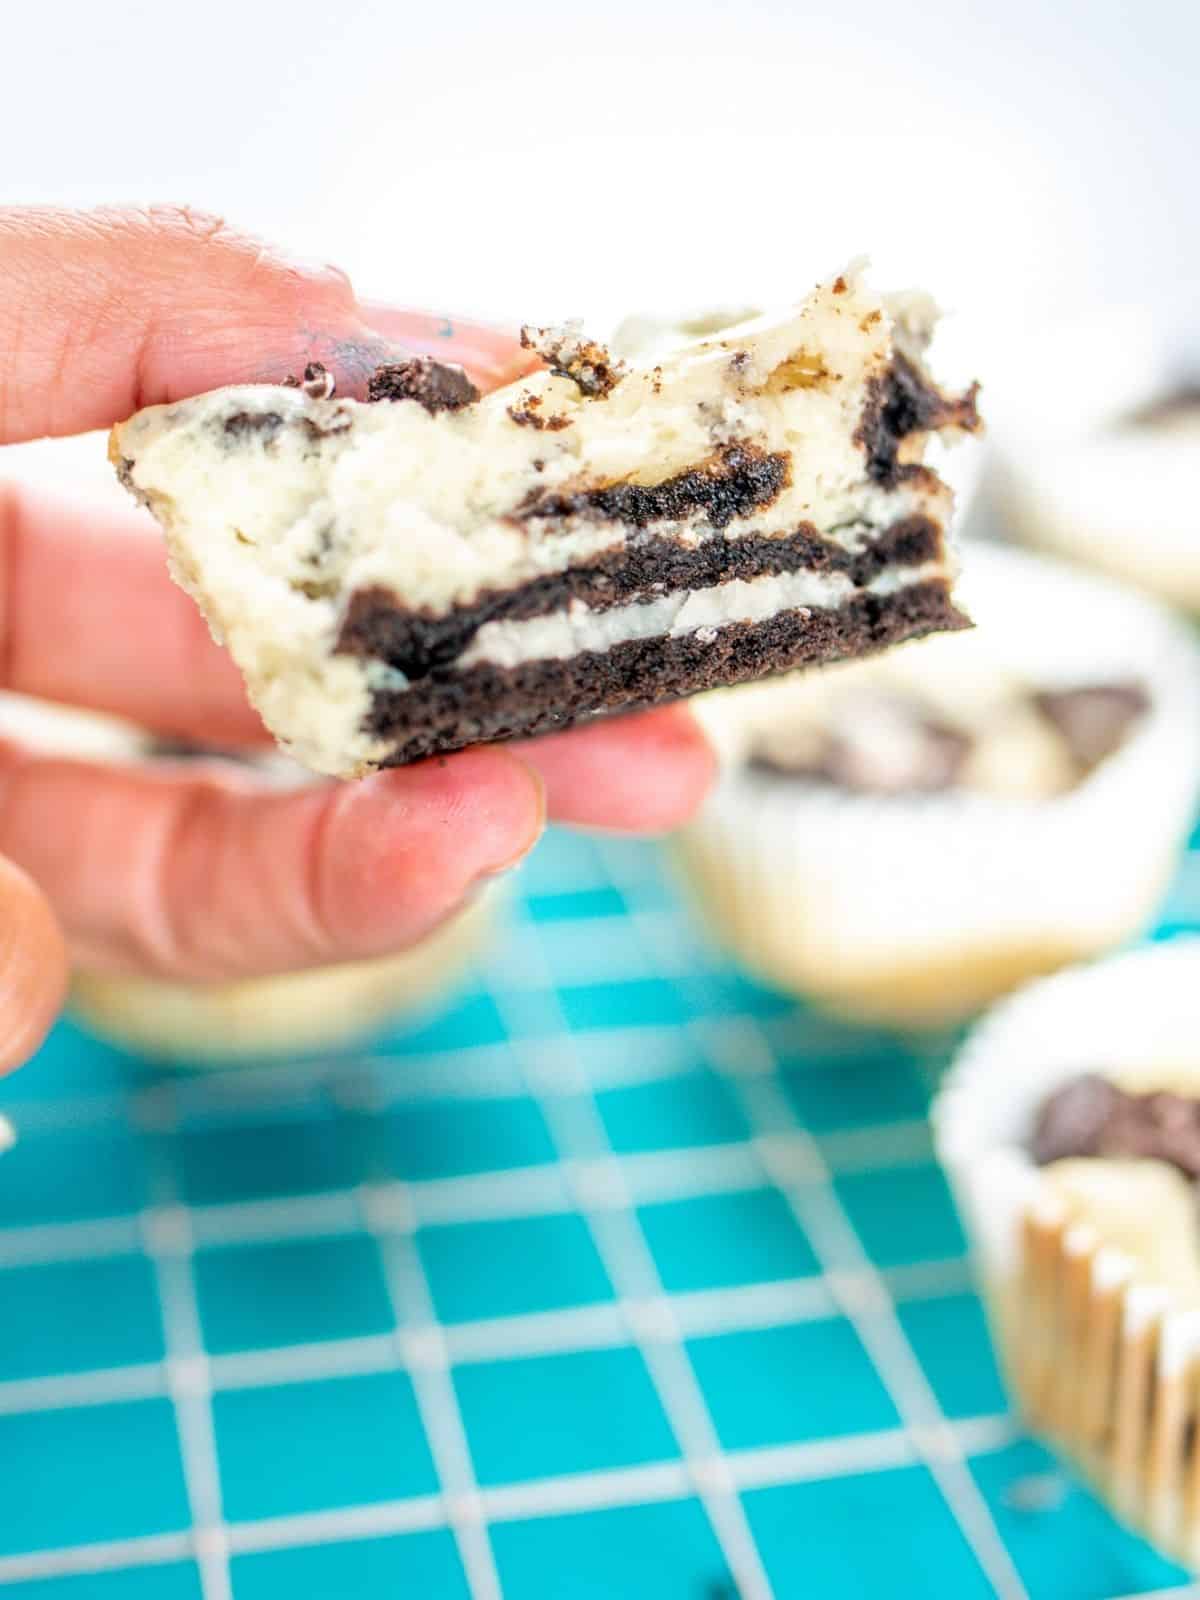 Inside view of Oreo Cheesecake being held in hand.